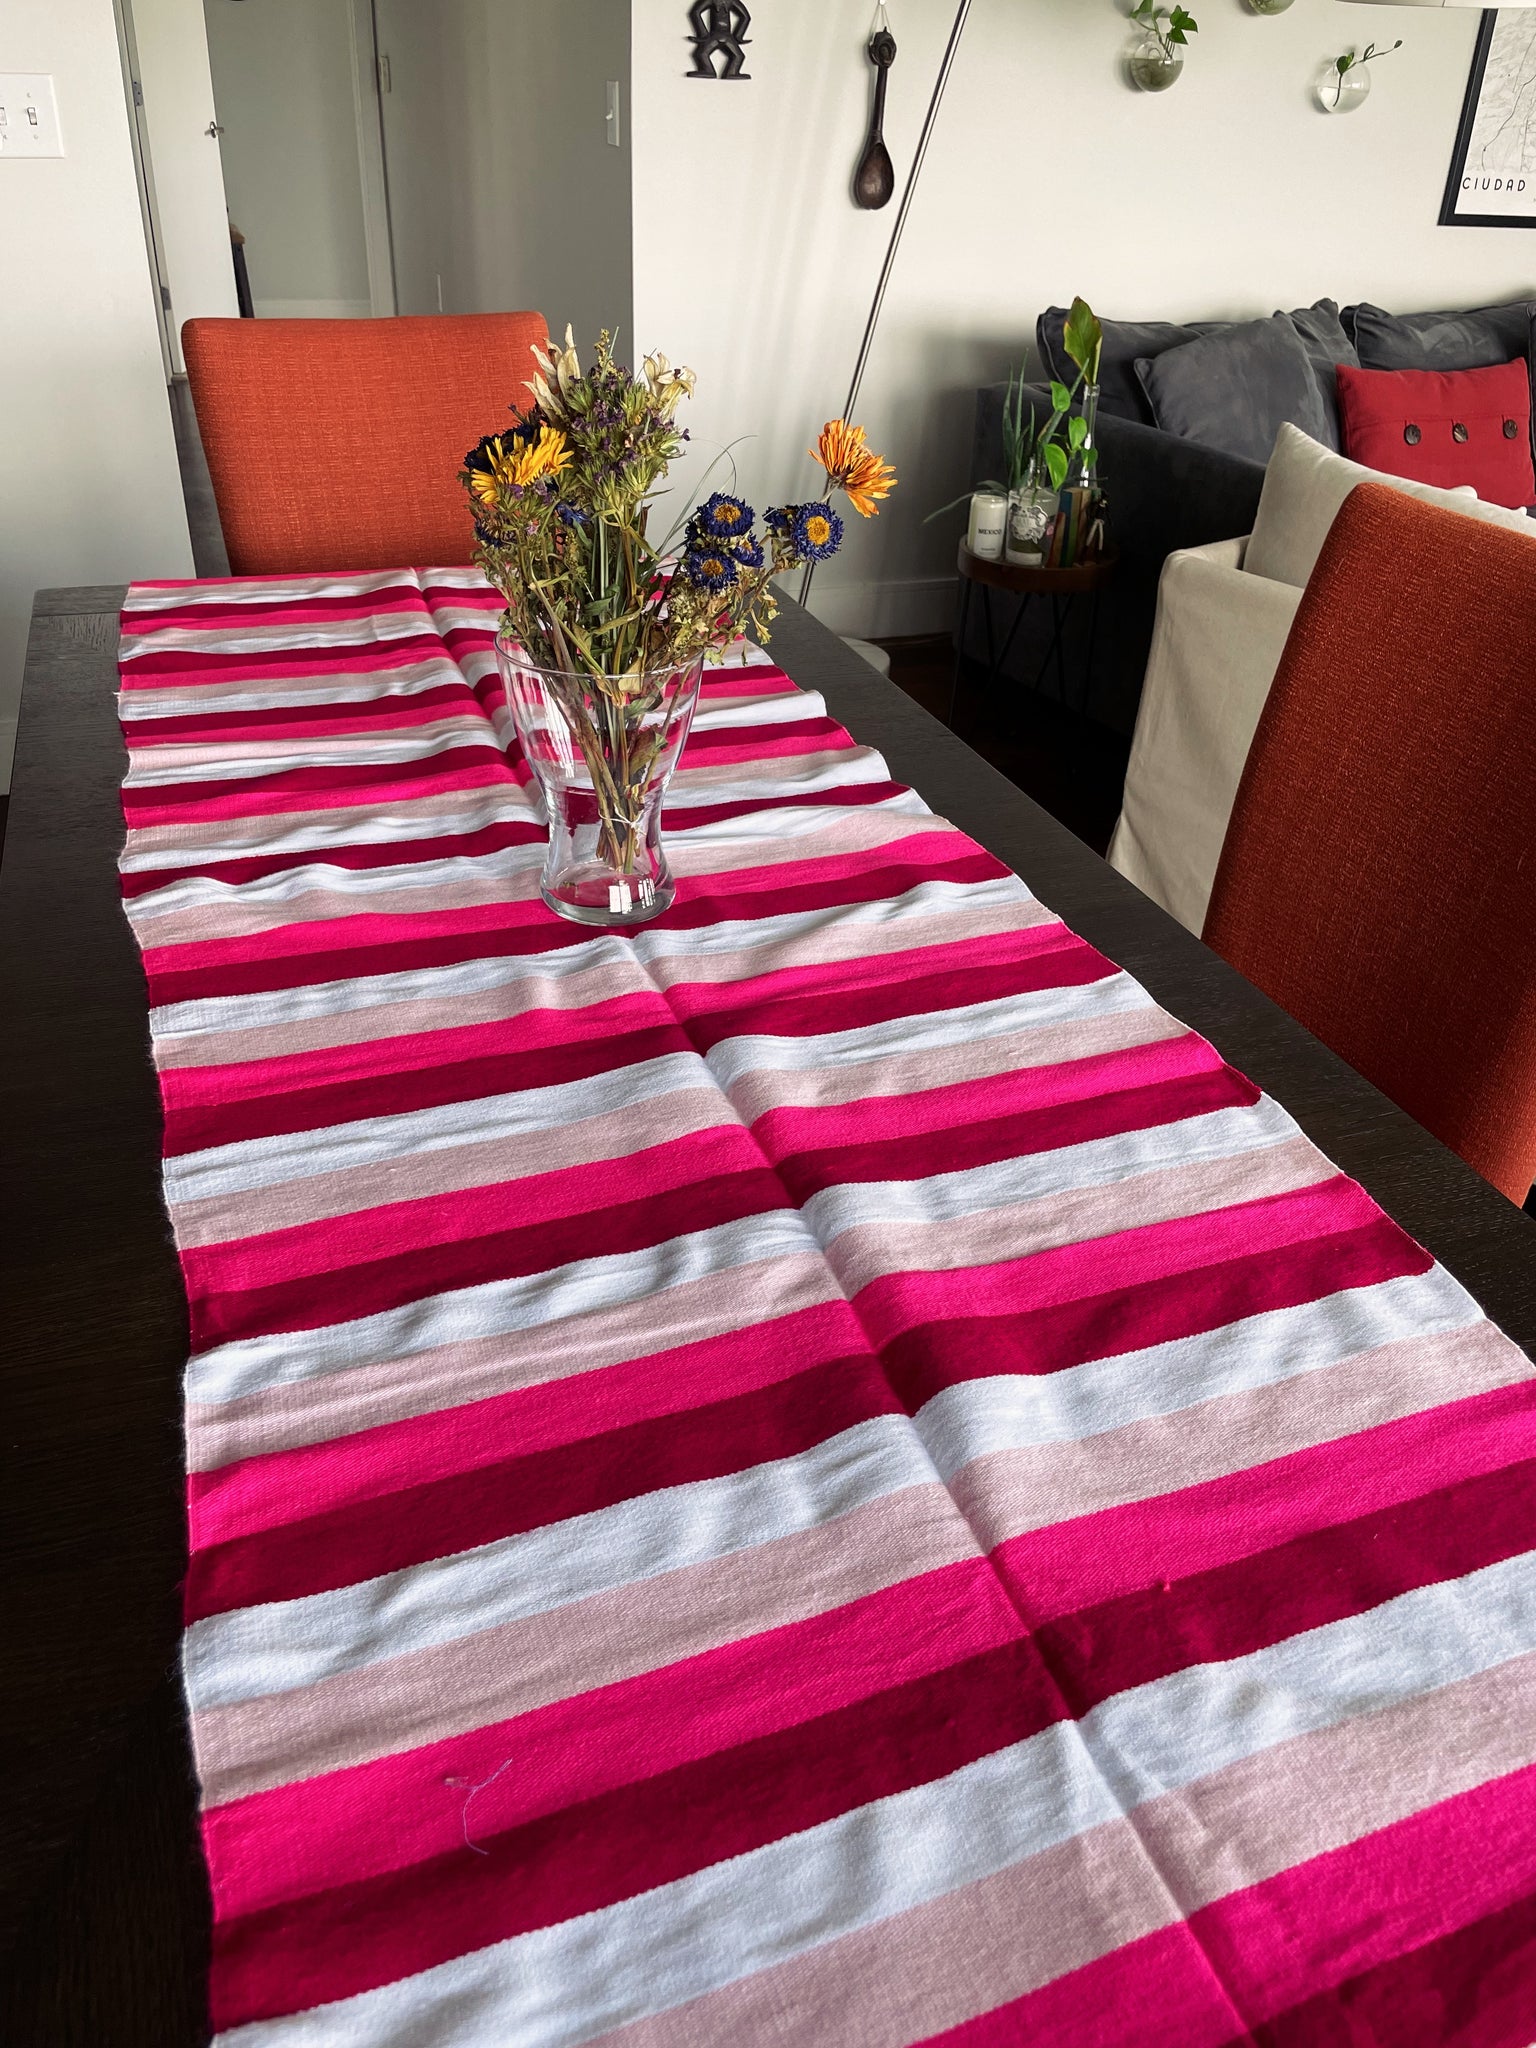 Mexican Cotton Loom Table Runner